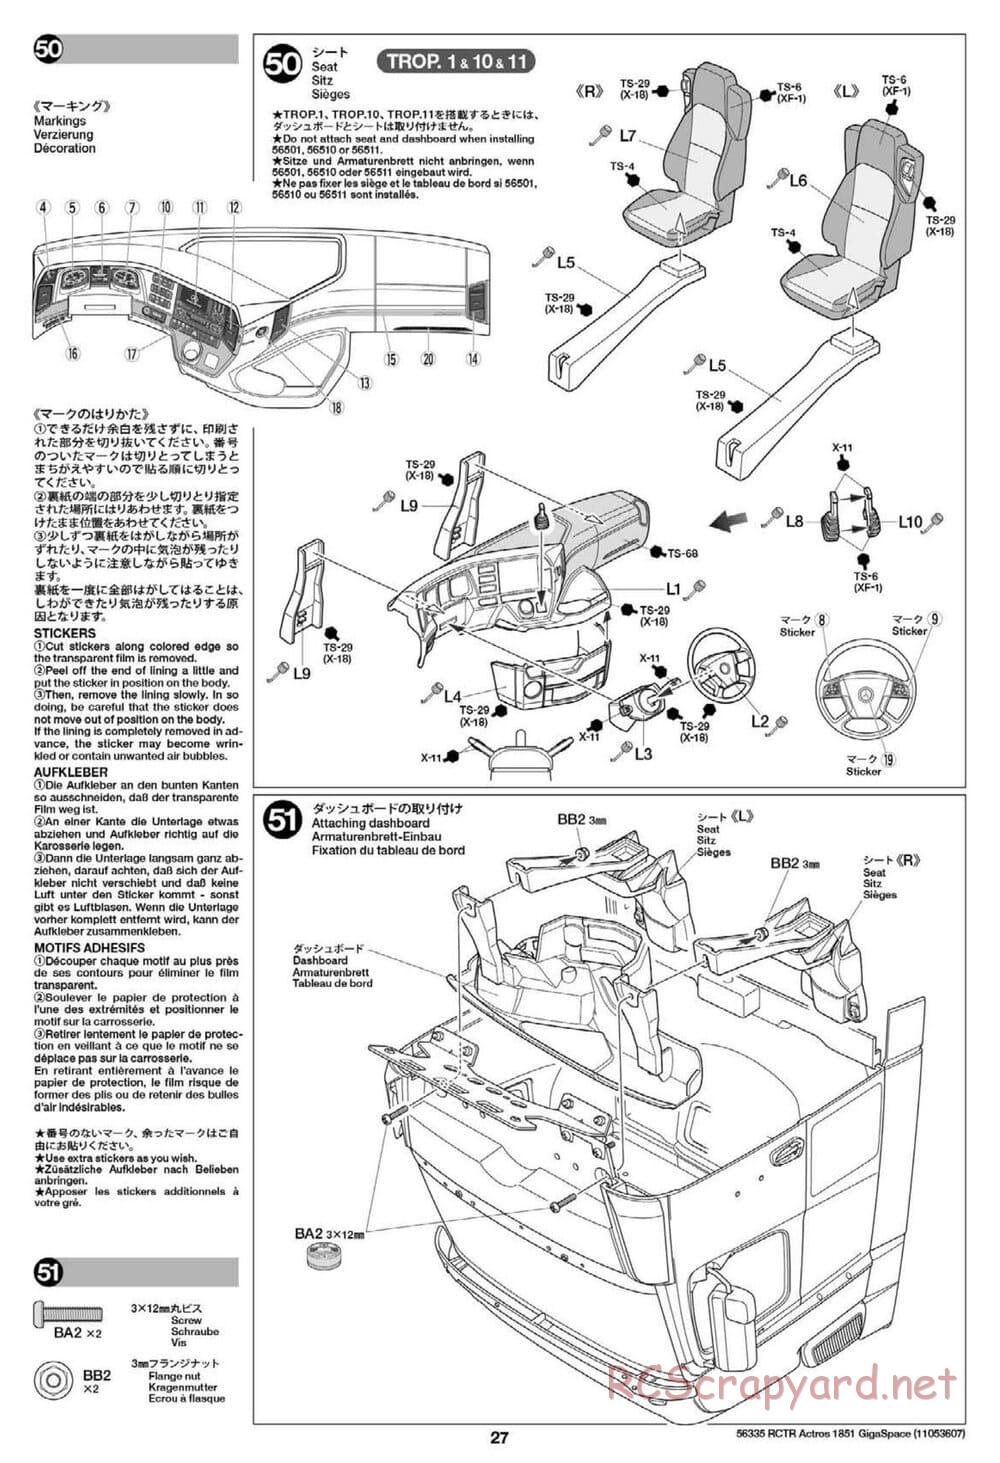 Tamiya - Mercedes-Benz Actros 1851 Gigaspace Tractor Truck Chassis - Manual - Page 27